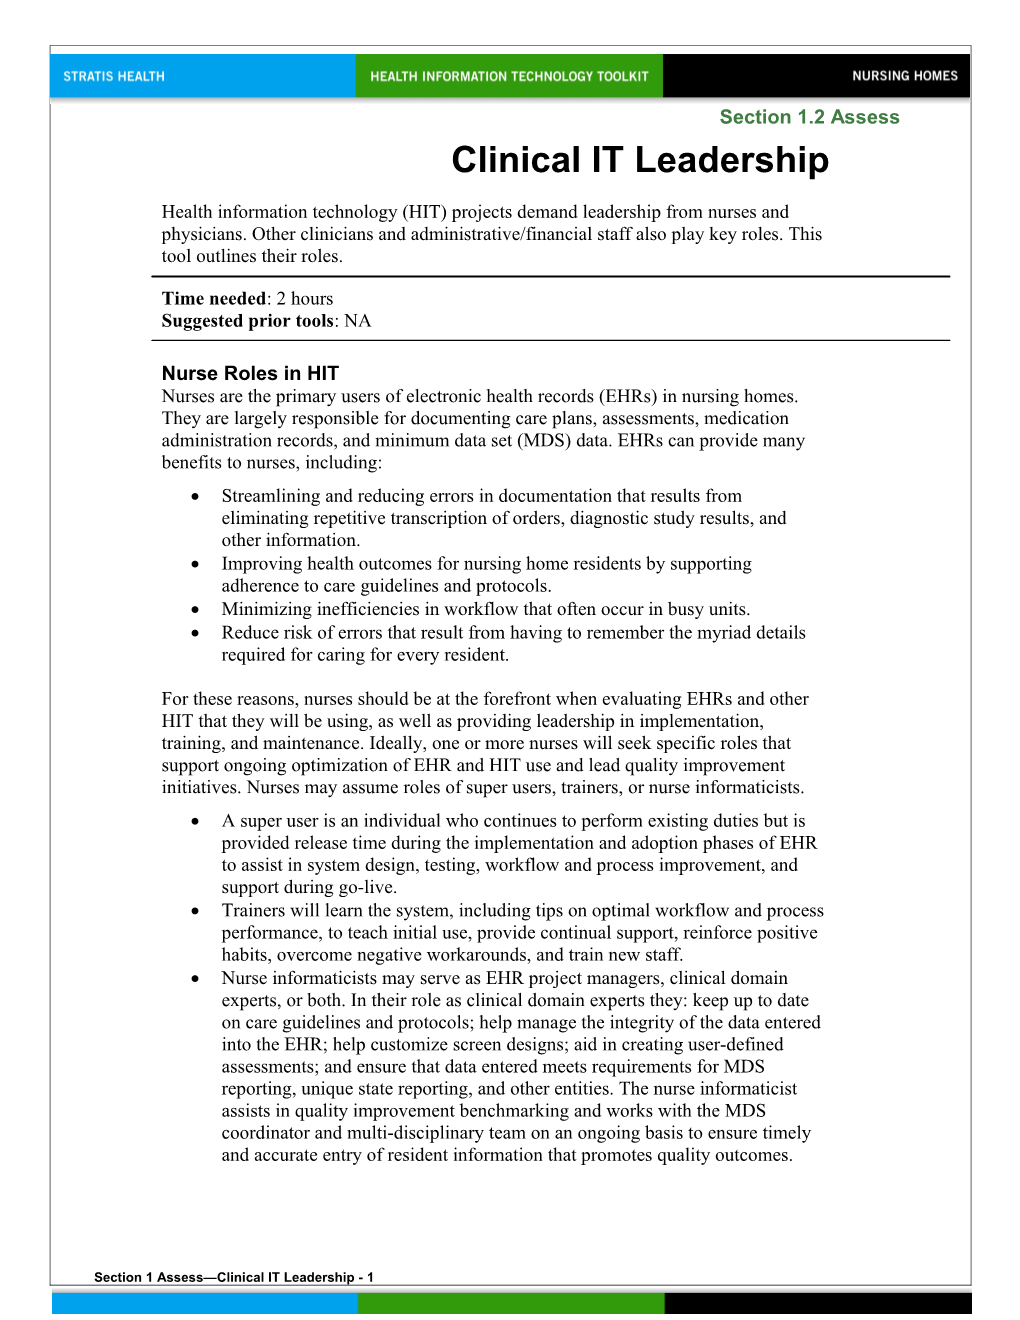 1 Clinical IT Leadership